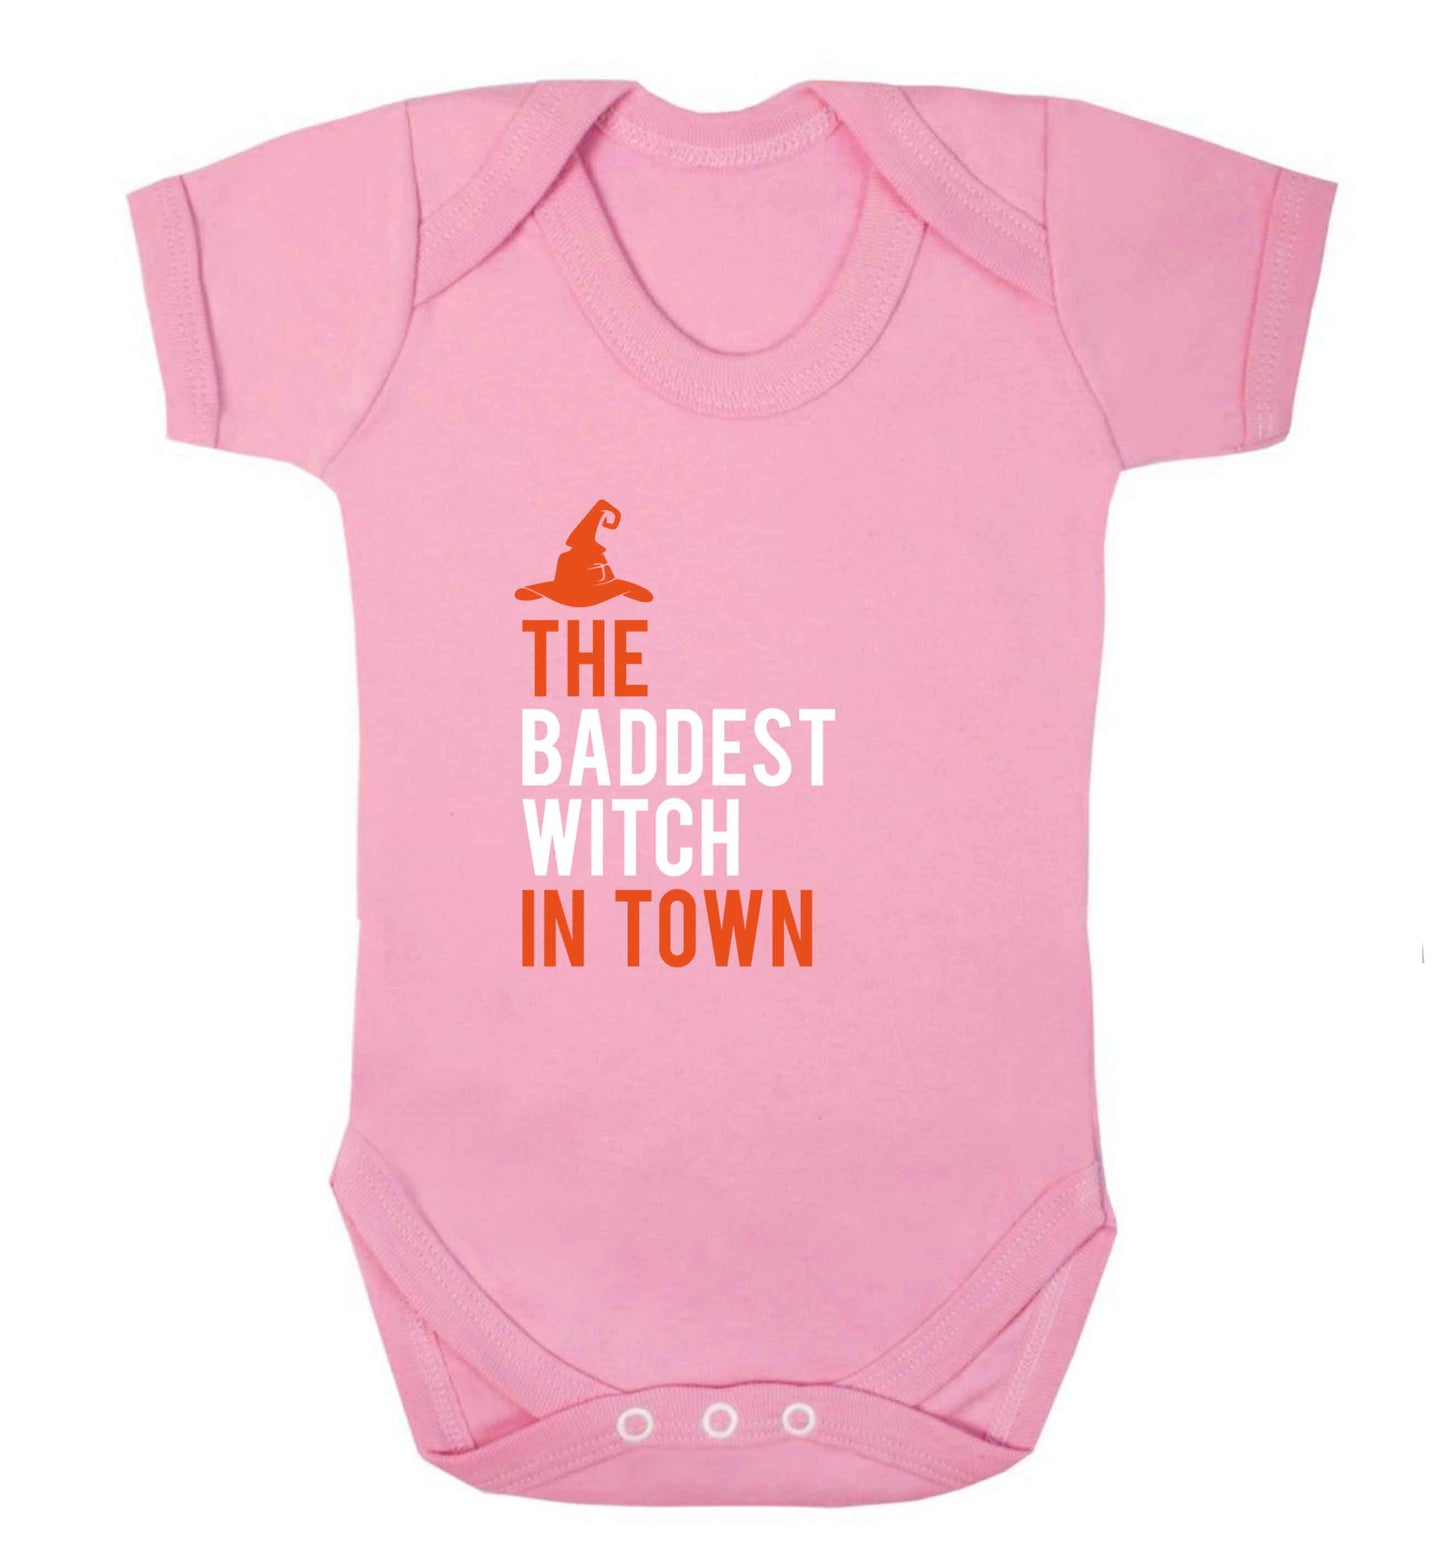 Badest witch in town baby vest pale pink 18-24 months